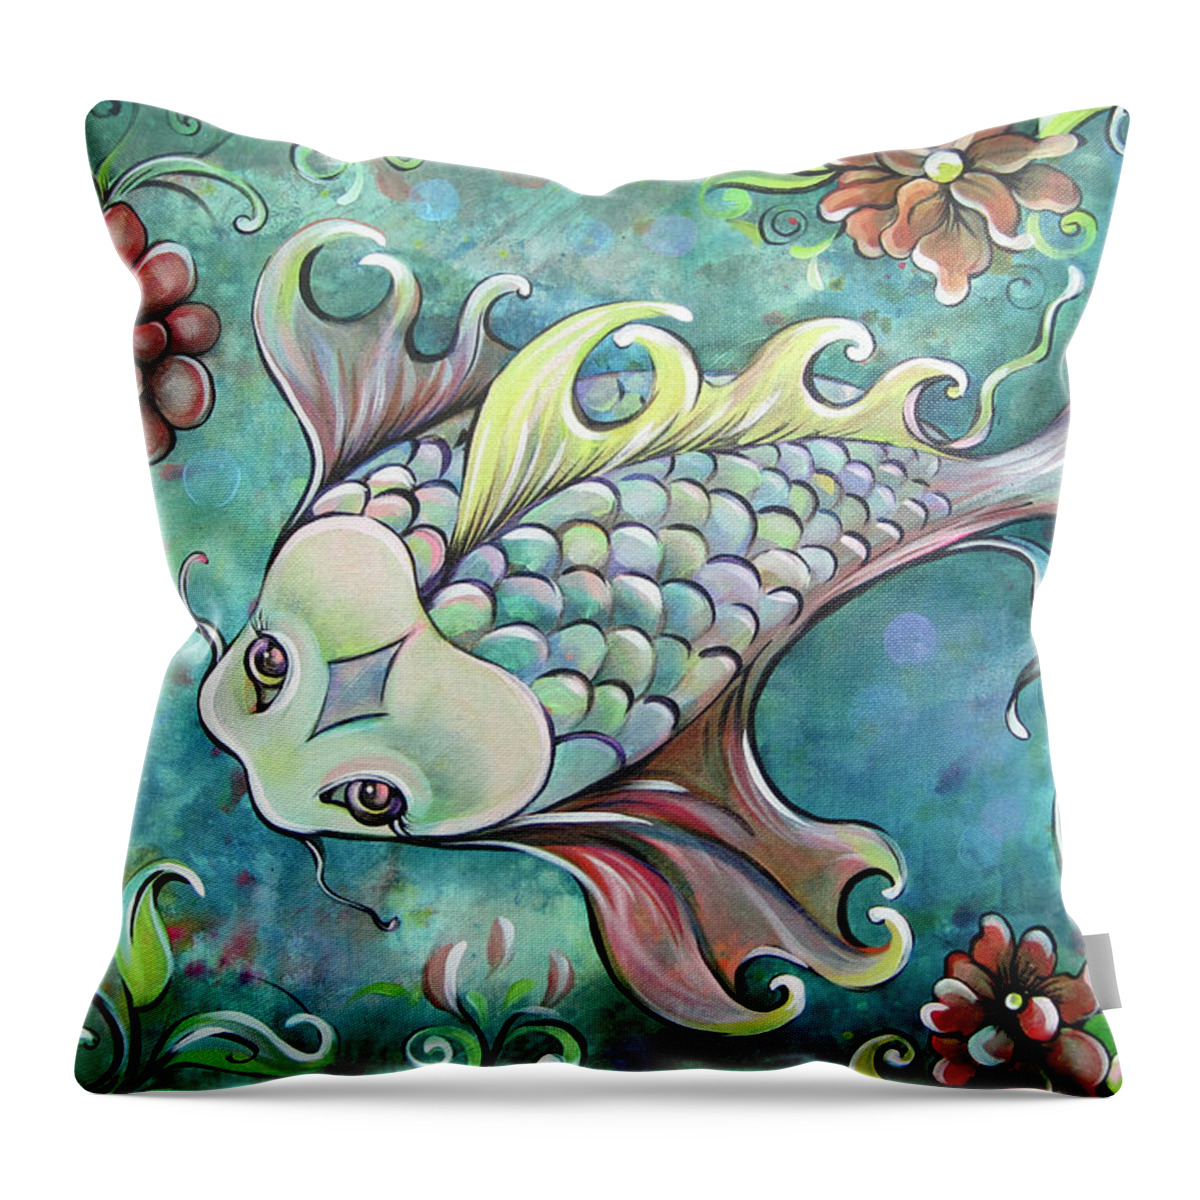 Koi Throw Pillow featuring the painting Emerald Koi by Shadia Derbyshire